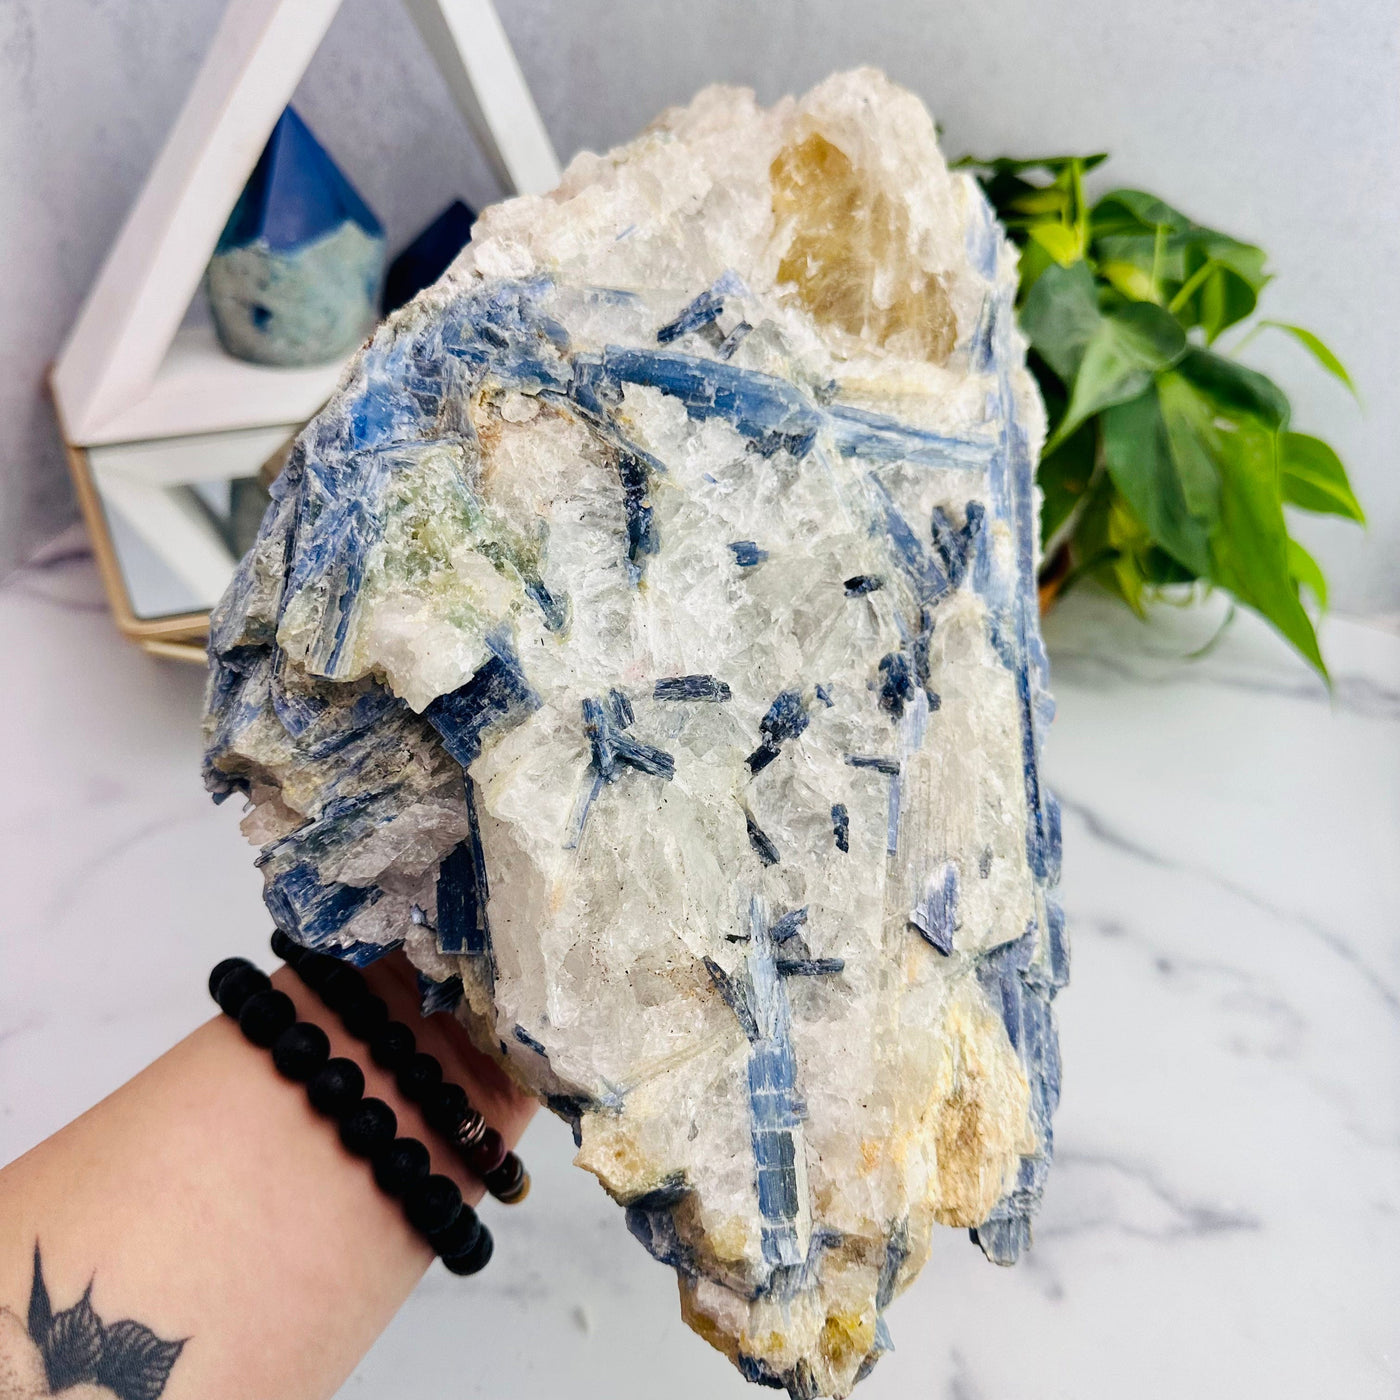 Blue Kyanite Rough Formation With Hand For Size Refernce